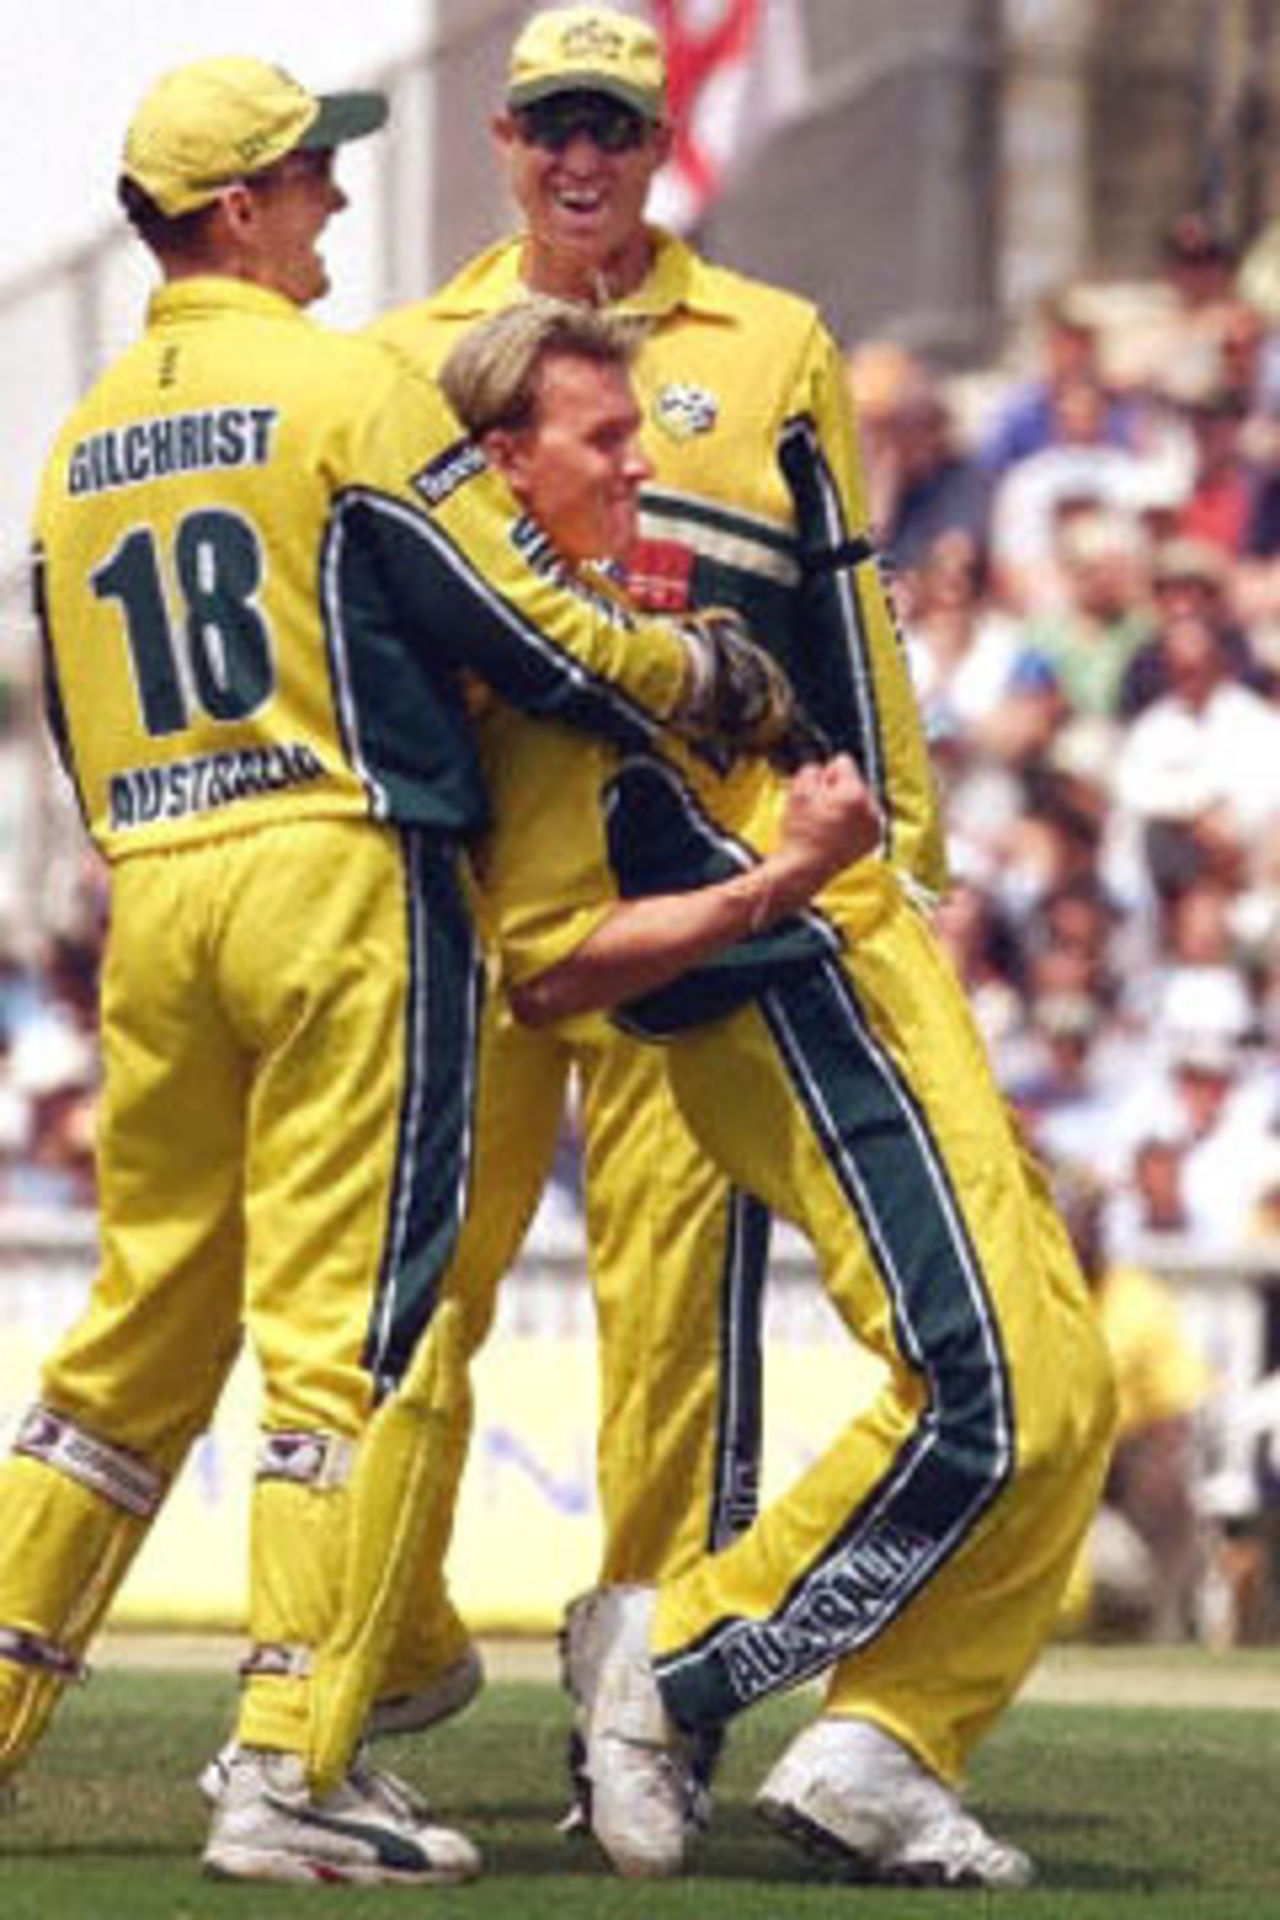 Brett Lee is hugged by Adam Gilchrist and  Matthew Hayden after dismissing Darren Gough for a golden duck, 9th ODI at the Oval, 21 June 2001.